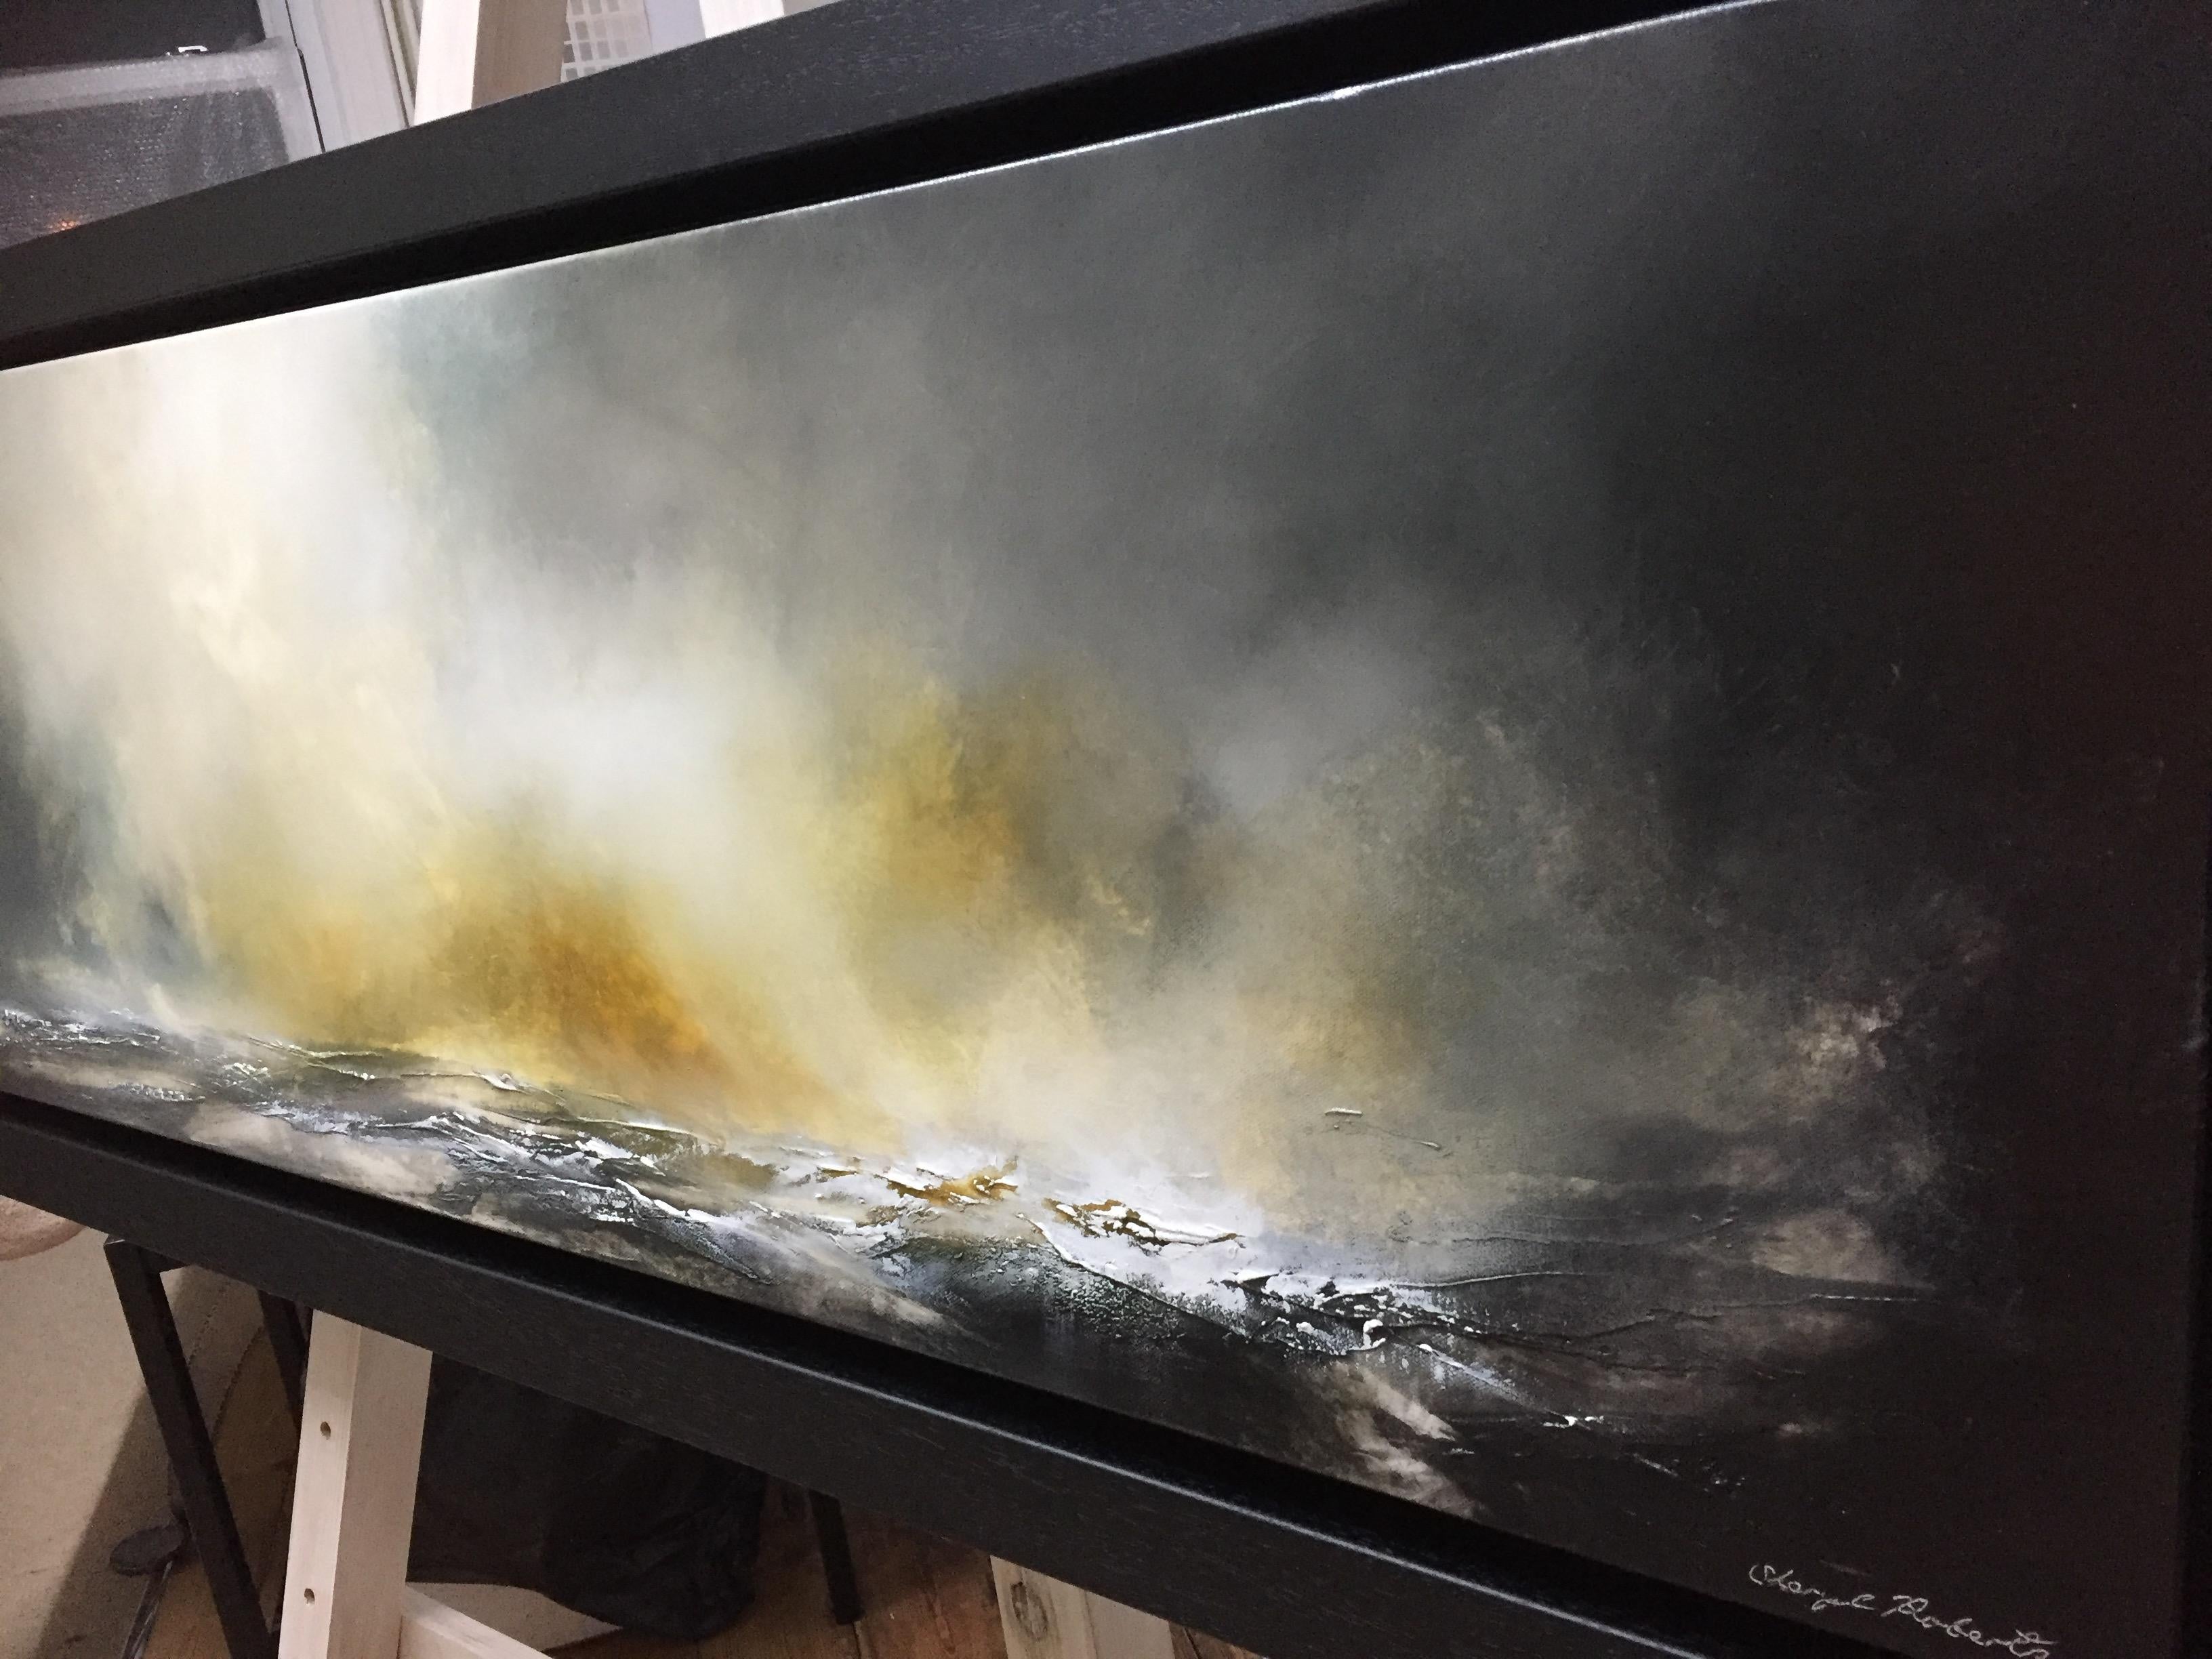 Sheryl Roberts
A Distant Stillness
Original Painting
Oil and Acrylic on Canvas
Signed
Sold Framed
(Please note that in situ images are purely an indication of how a piece may look).

A dramatic depiction of the powerful skies over the windswept